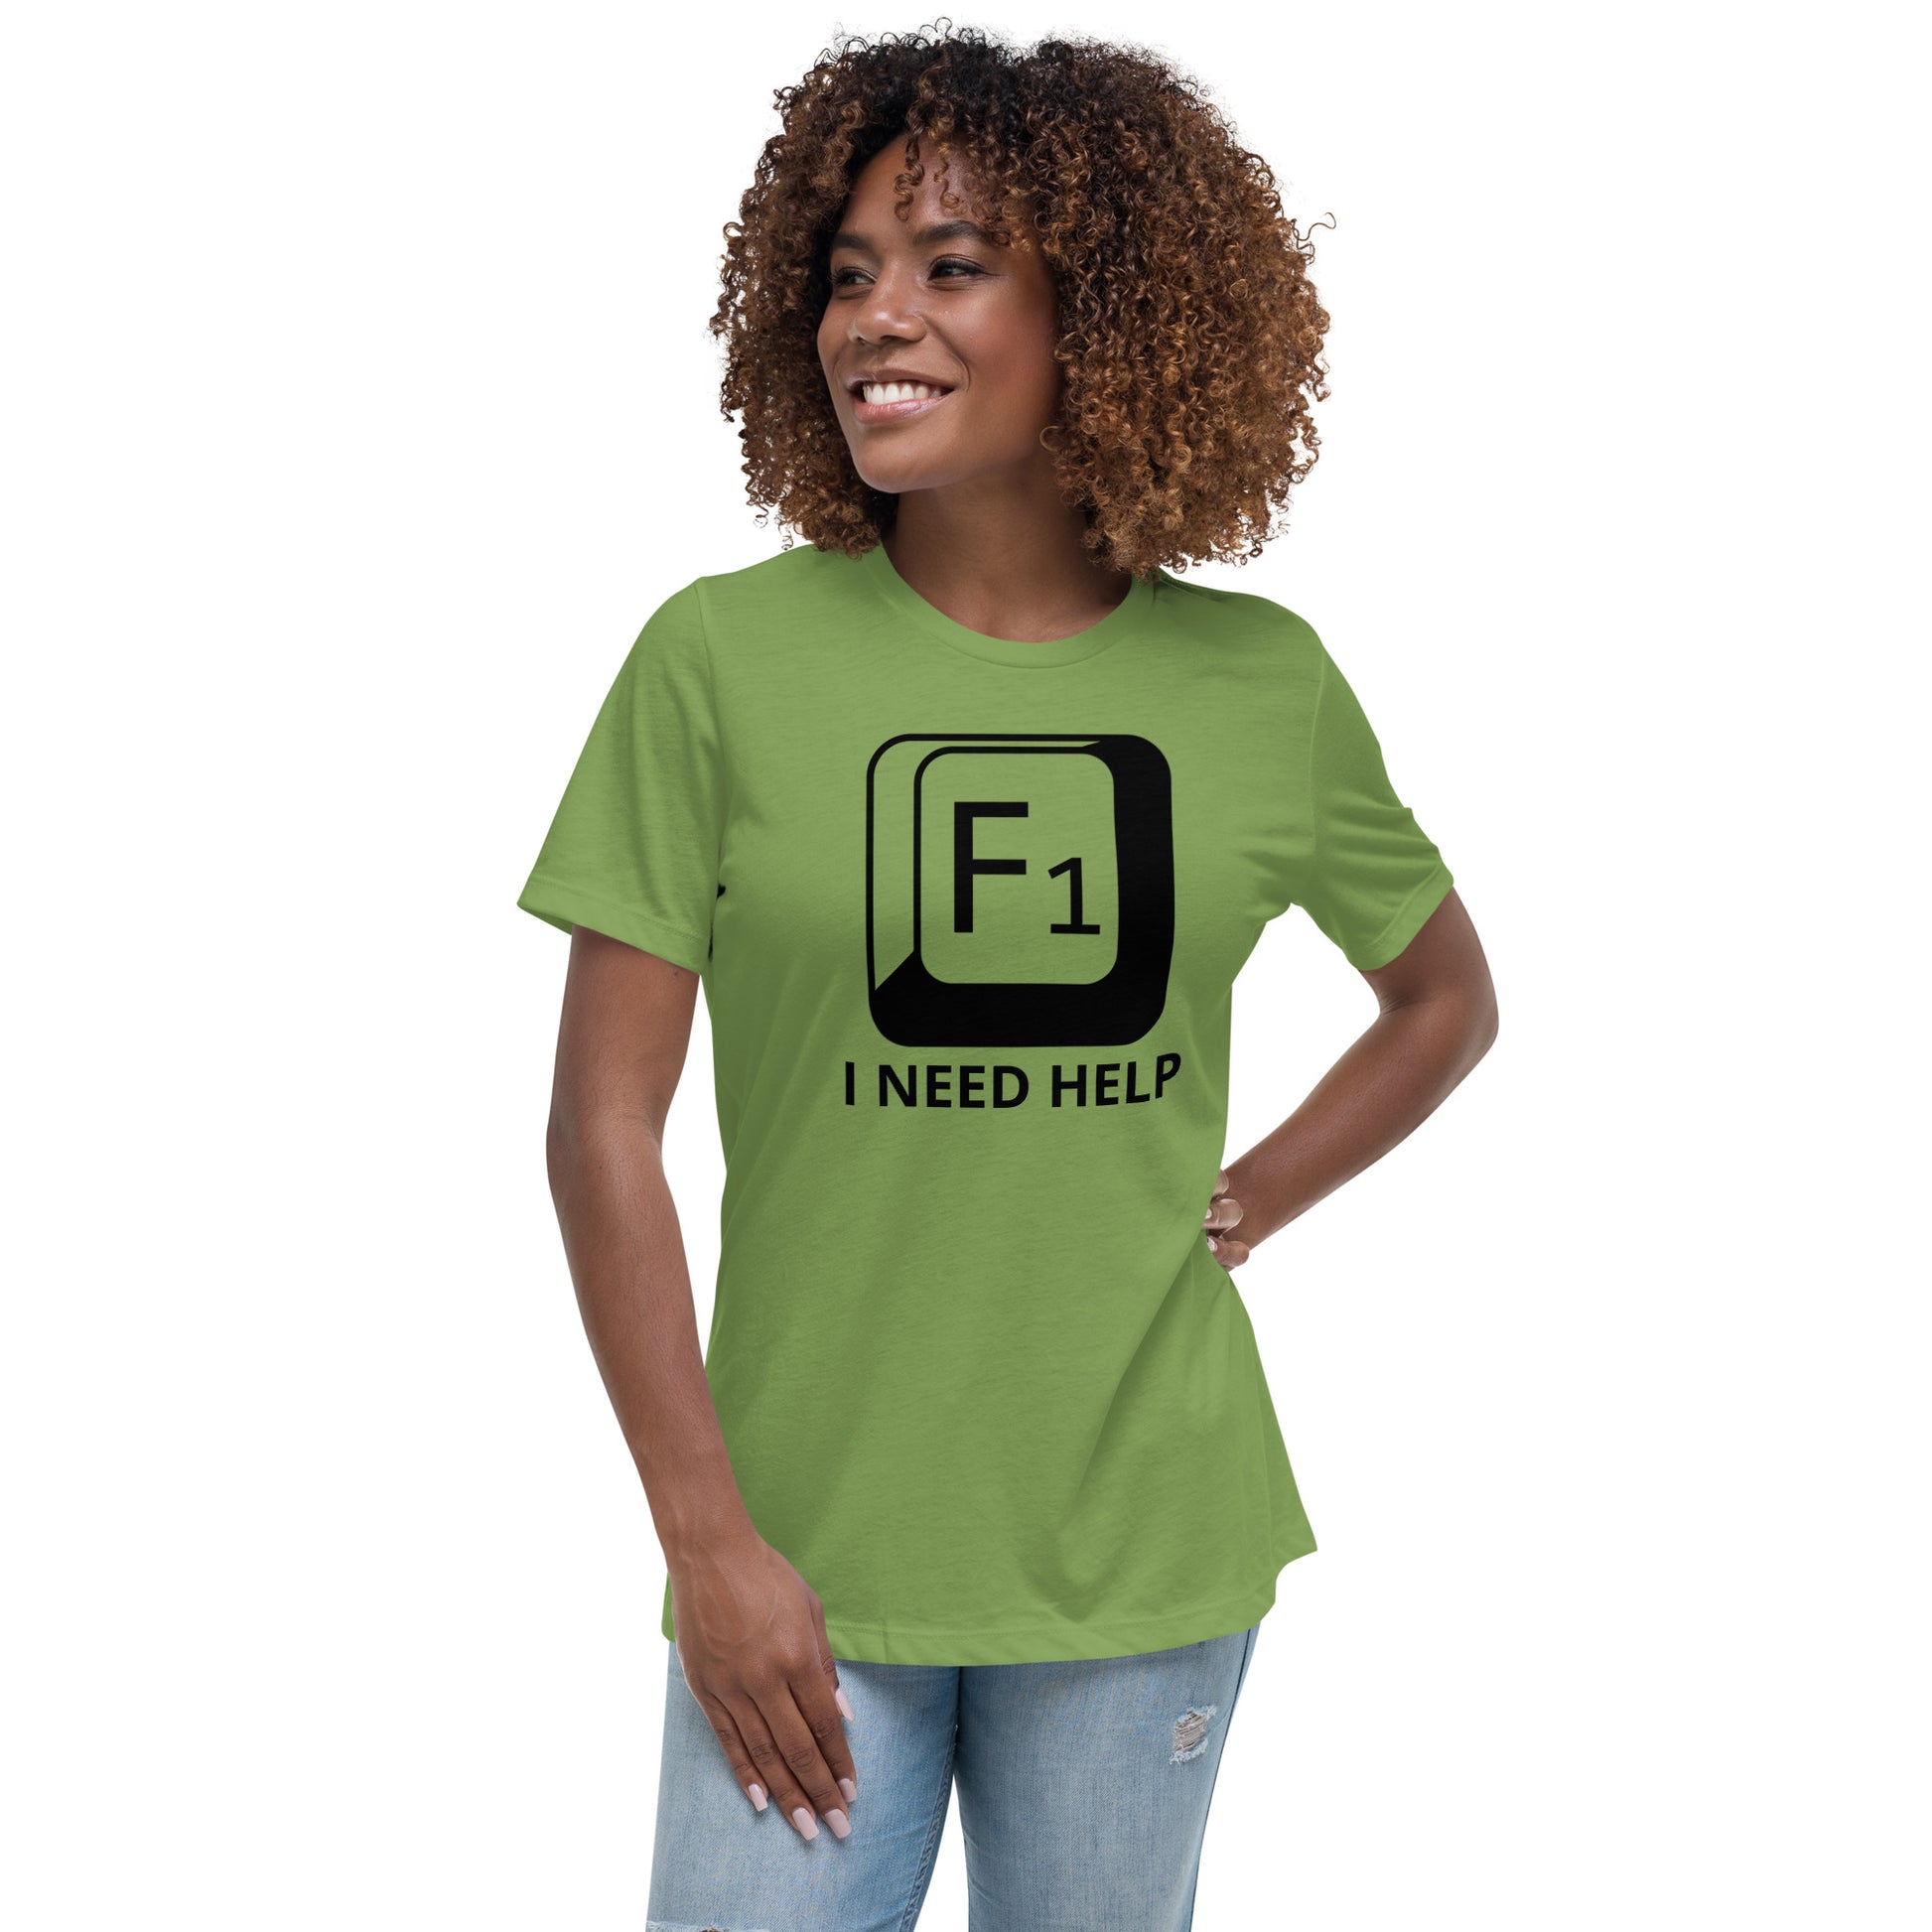 Woman with leaf green t-shirt with picture of "F1" key and text "I need help"